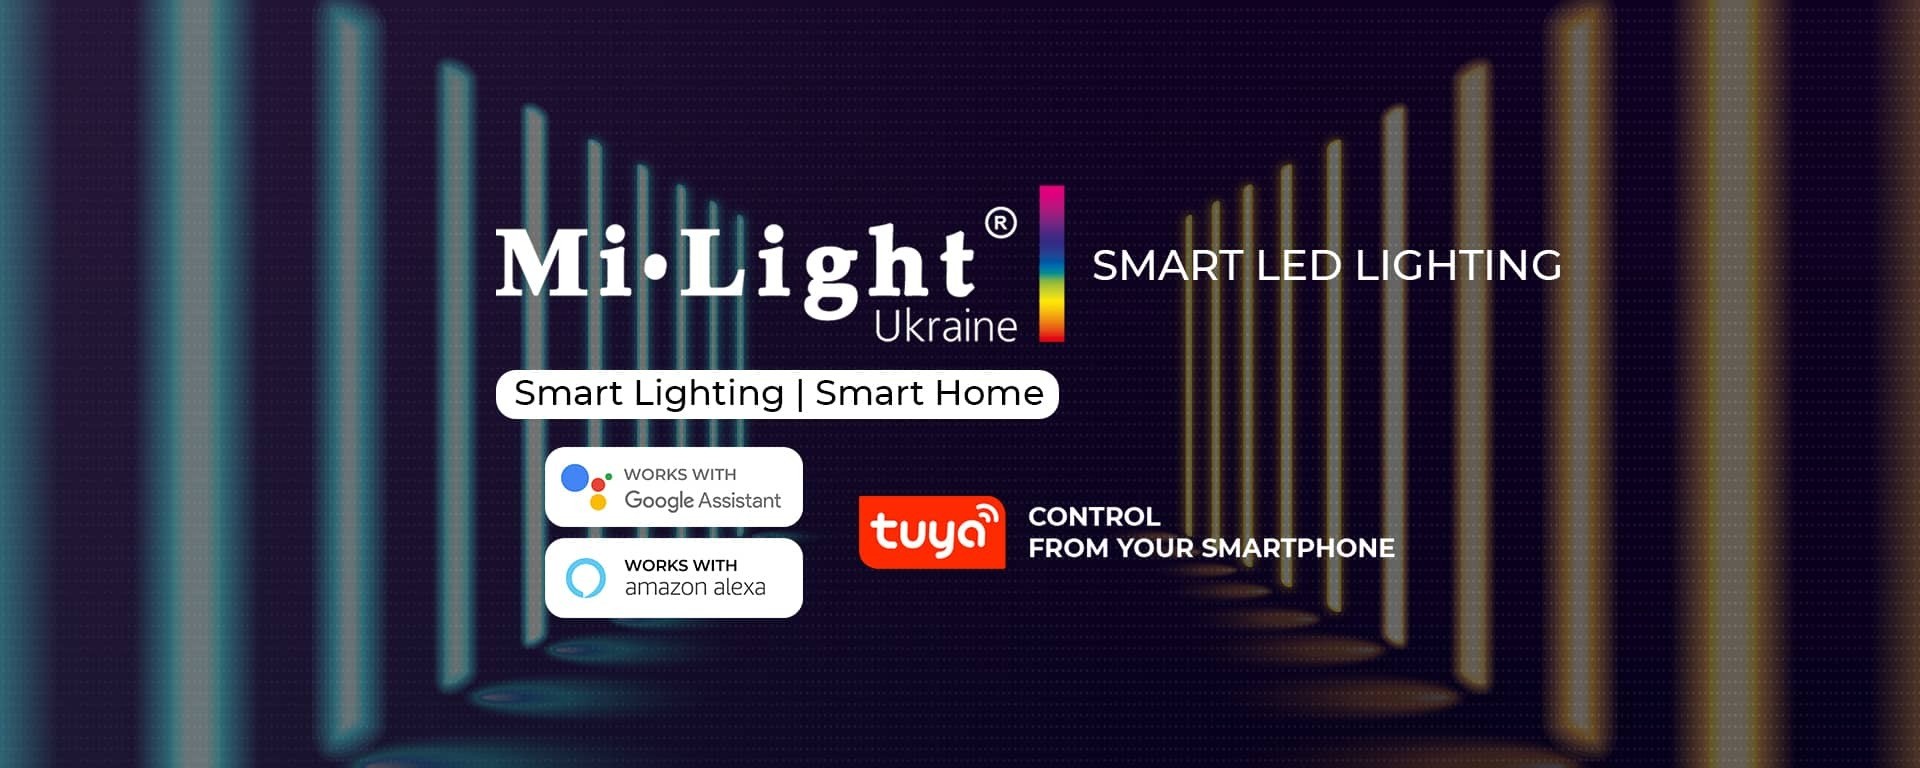 Control MiLight's lighting for smart homes and business spaces with Tuya Smart App